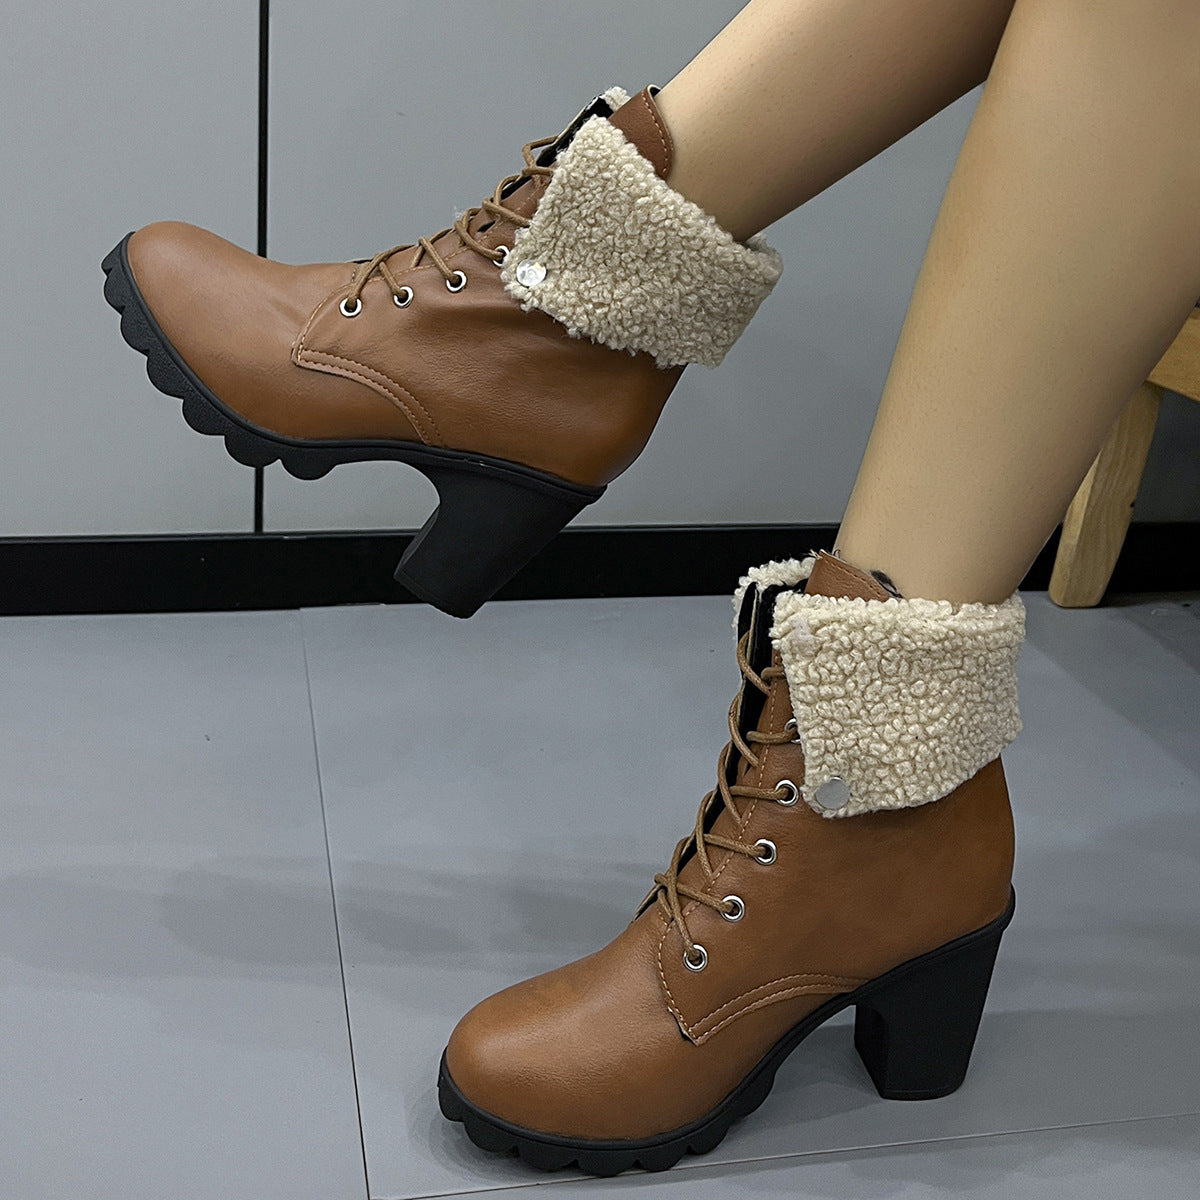 Retro suede round toe lace-up chunky heel short boots